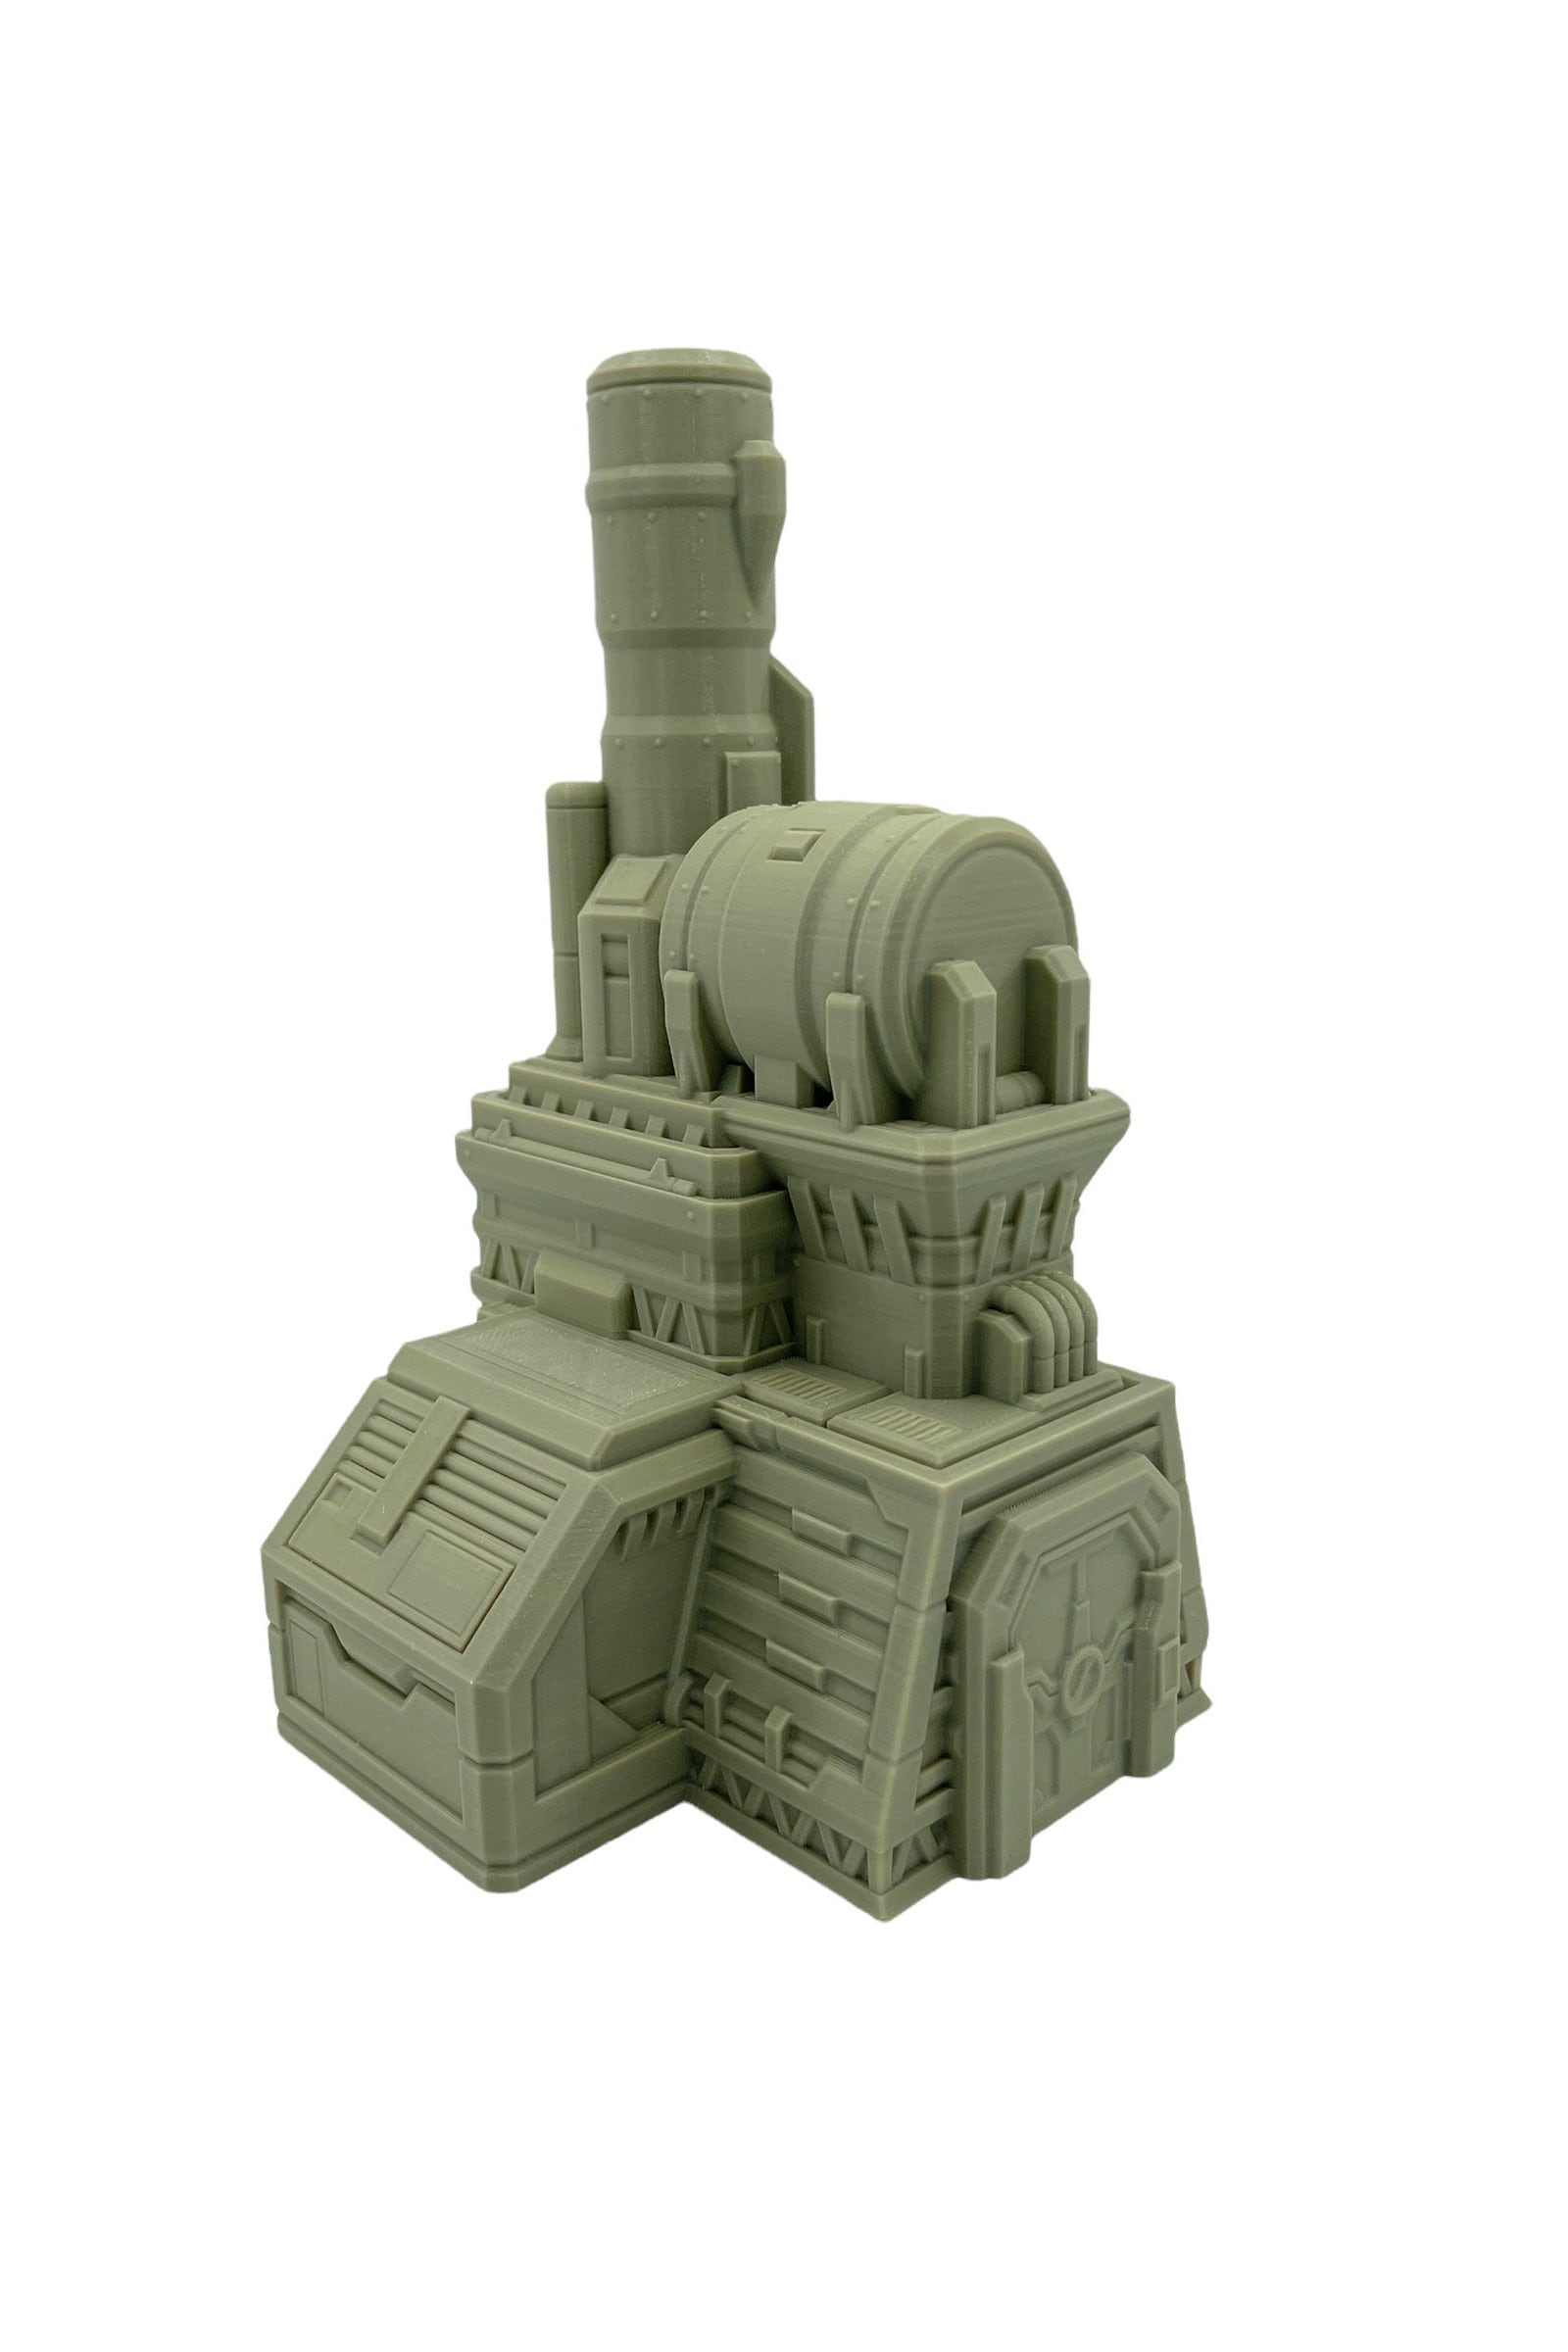 Outpost 21 - Control Station / Forbidden Prints / RPG and Wargame 3d Printed Tabletop Terrain / Licensed Printer